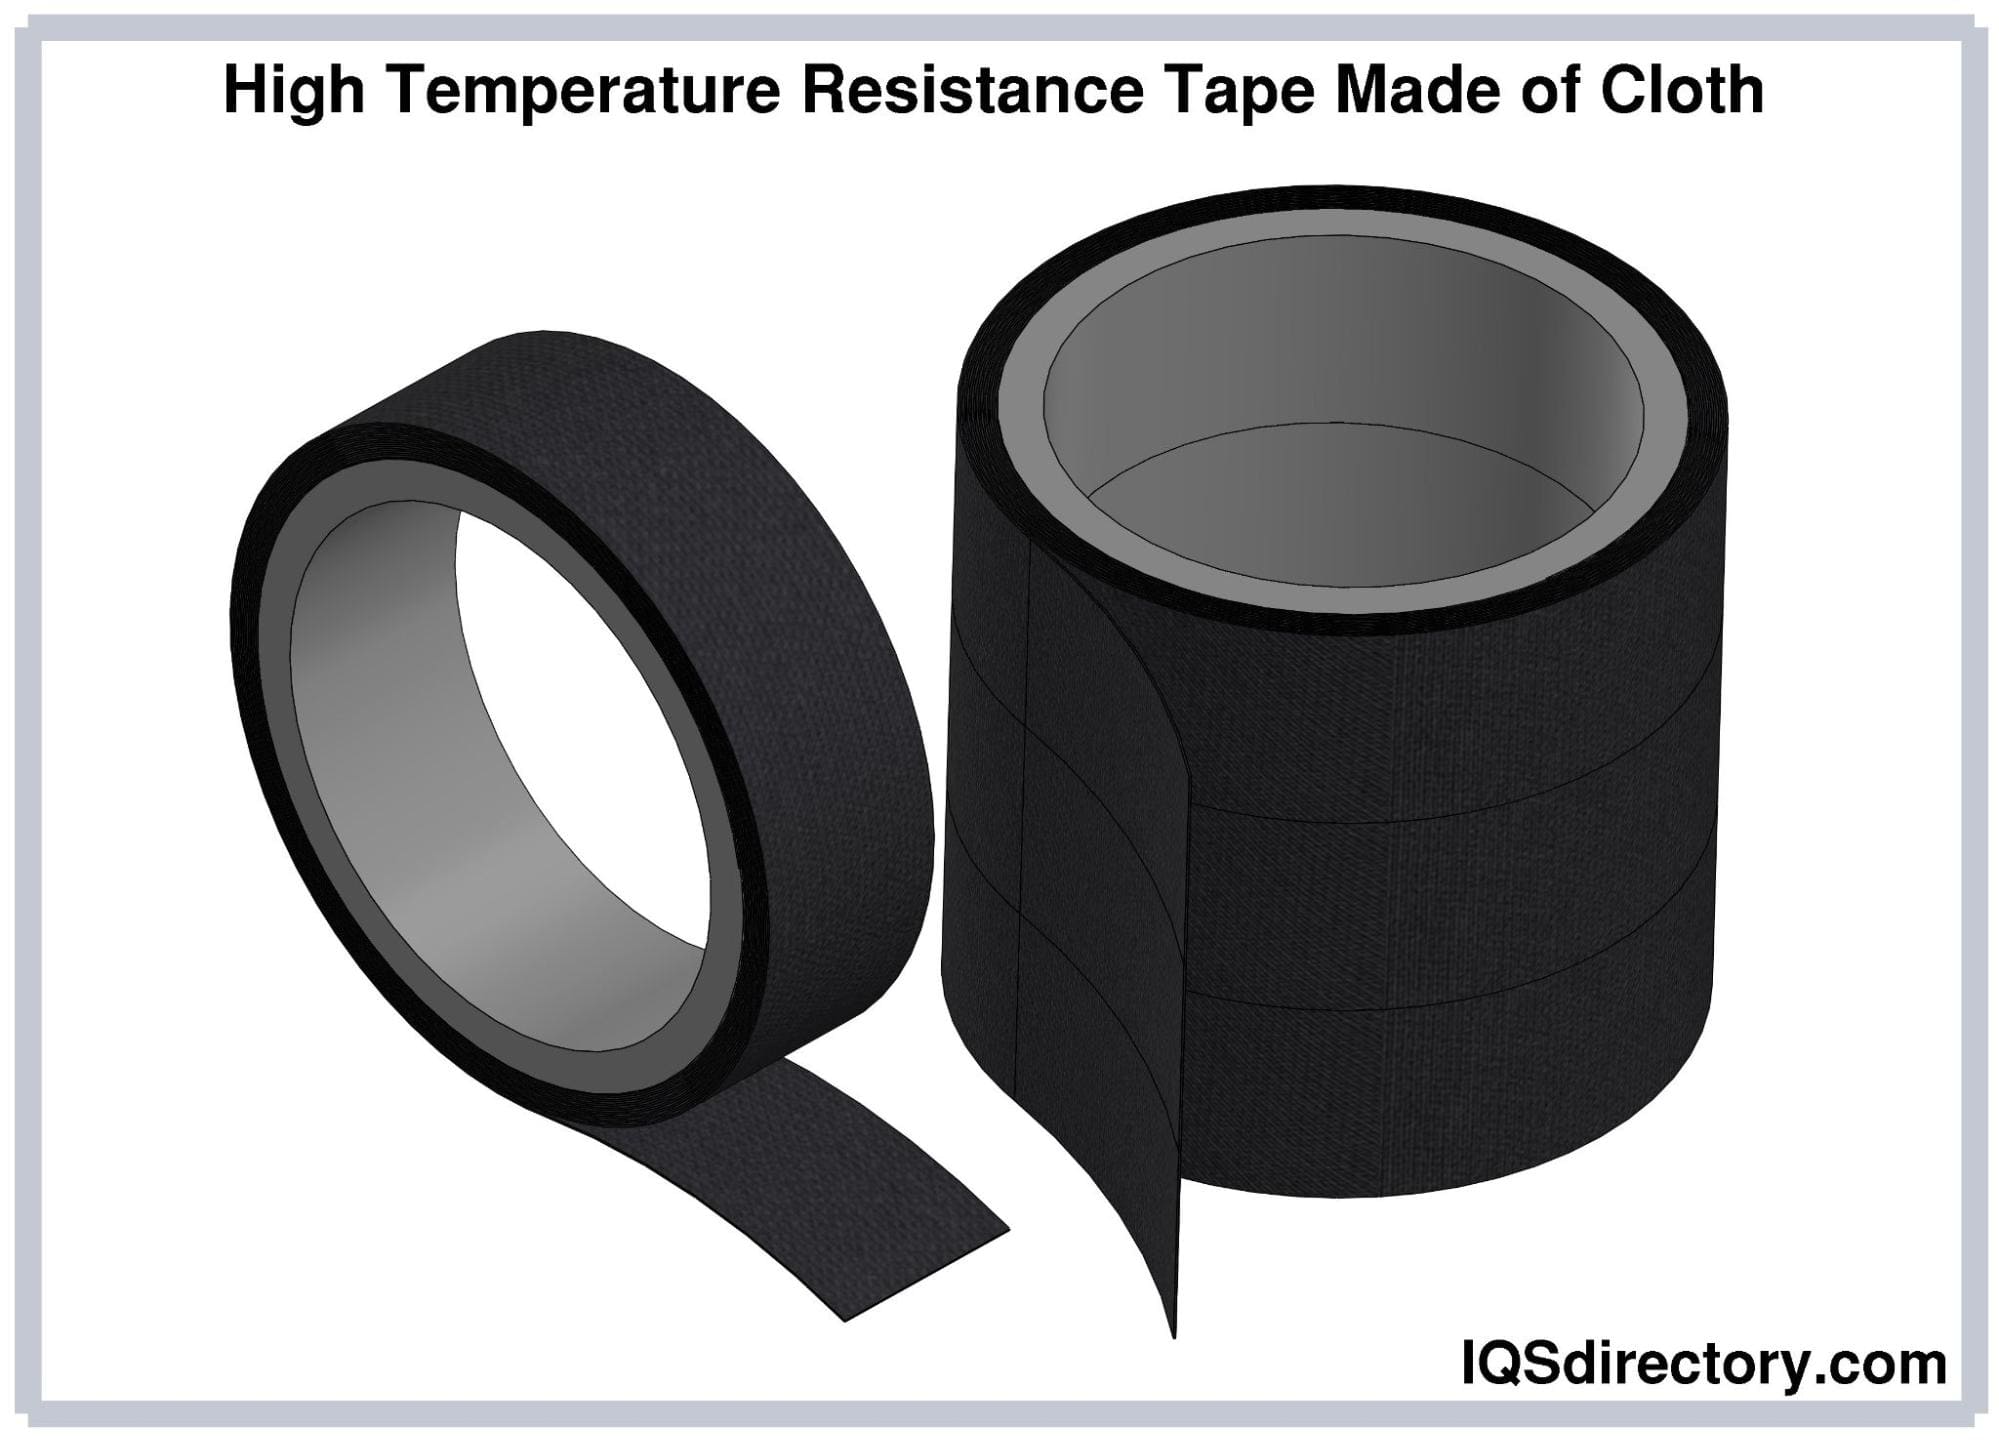 High Temperature Resistance Tape Made of Cloth